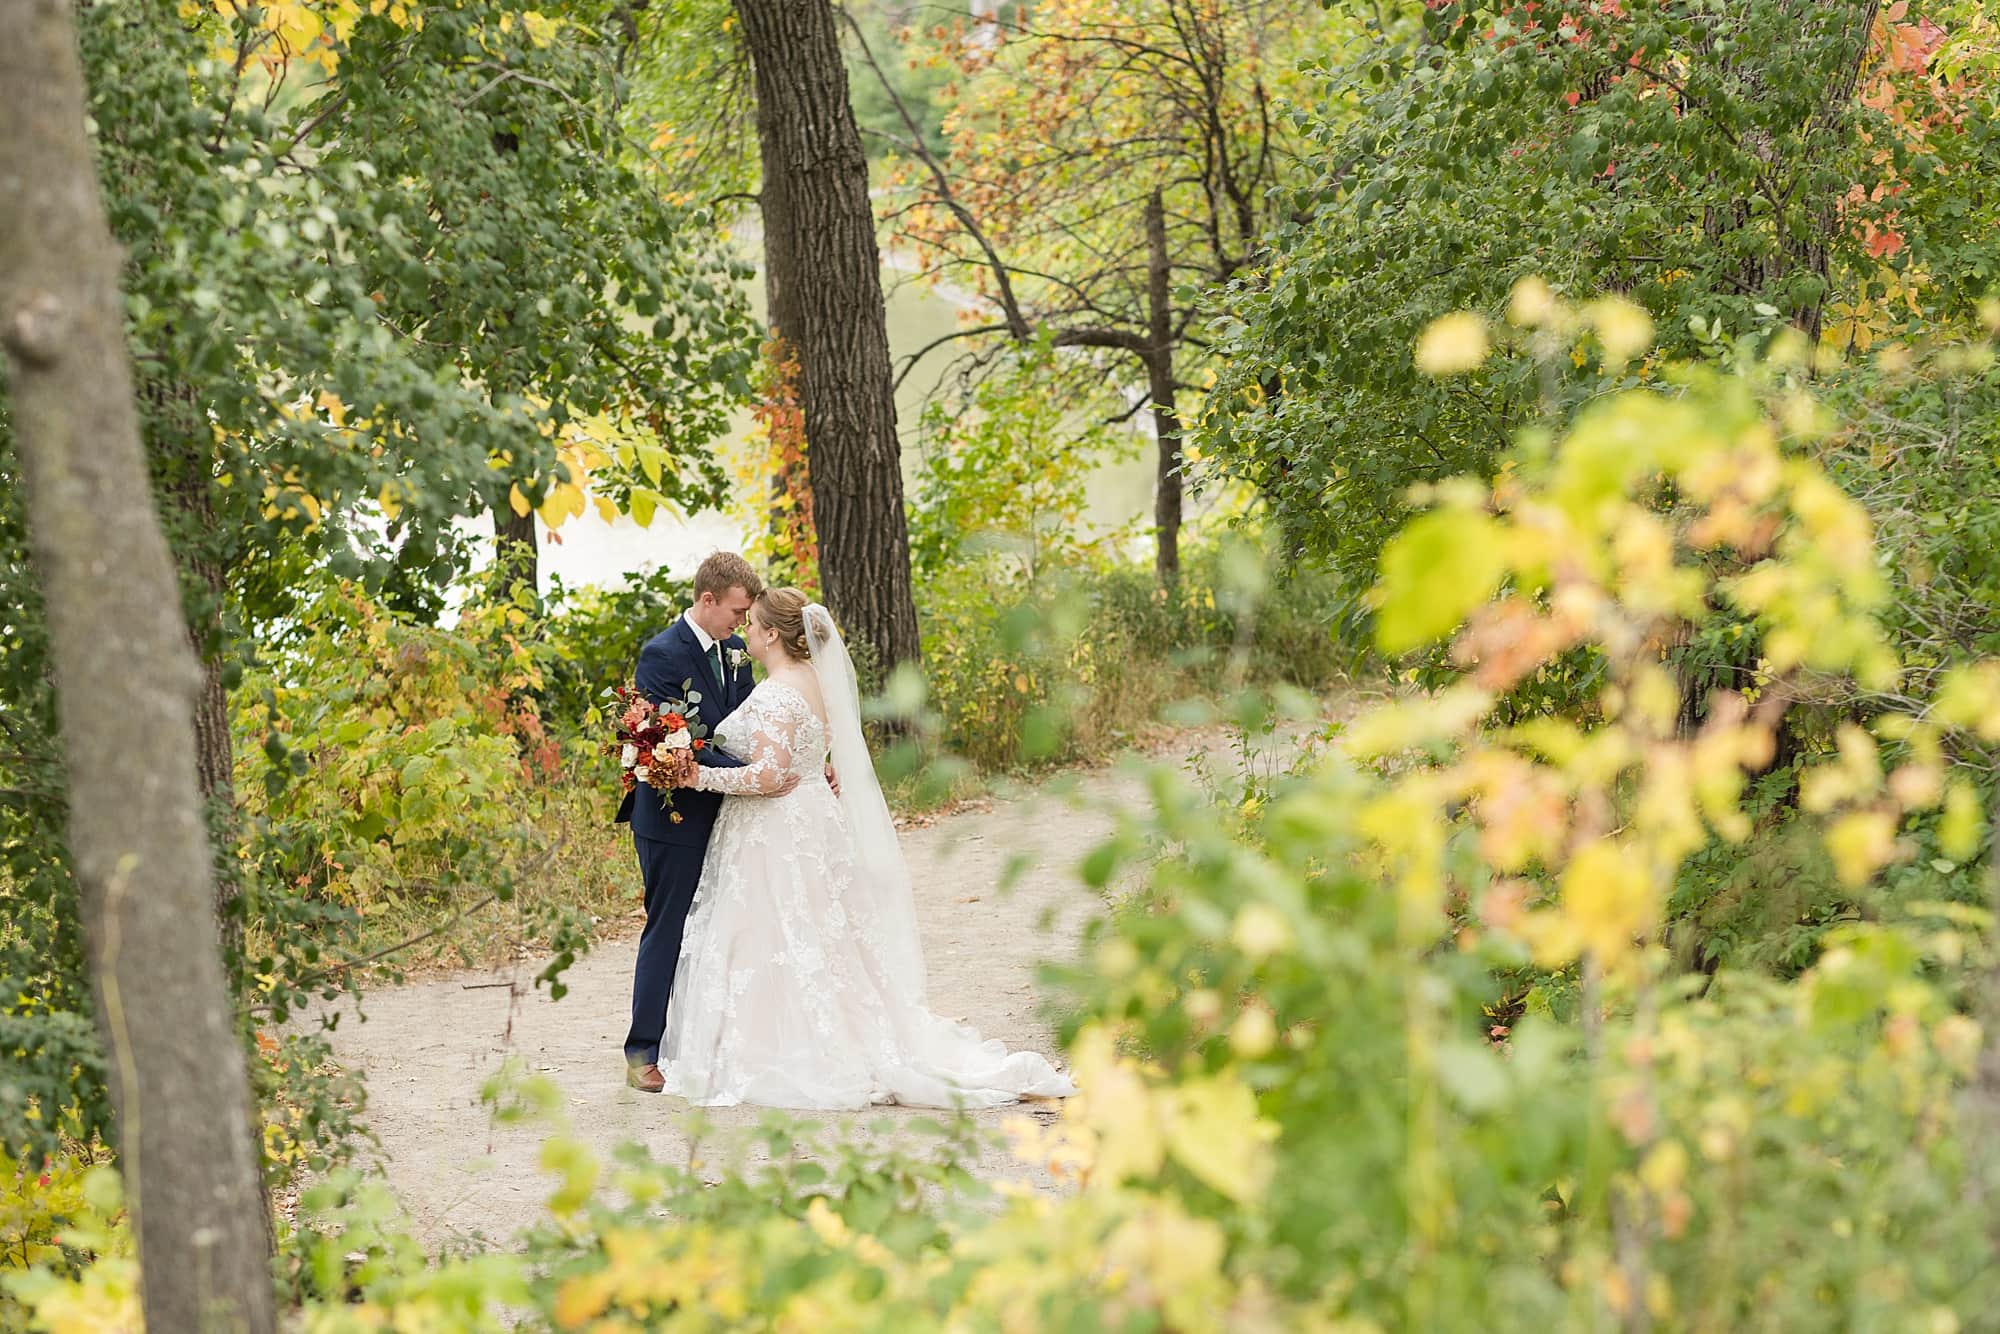 Bride and groom surrounded by fall colors at Orchard Glen Park in Fargo, ND